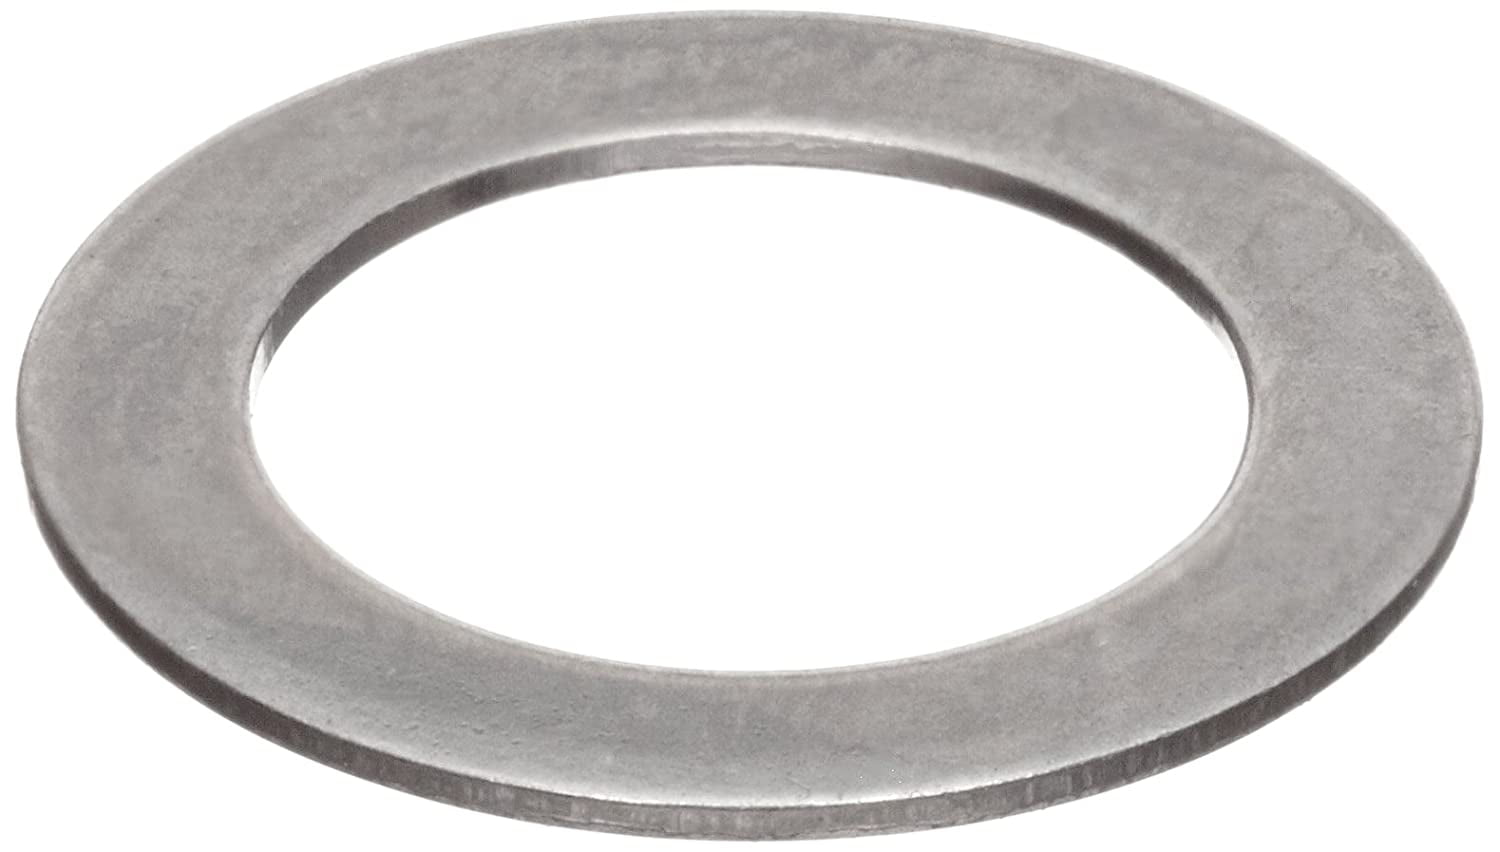 5/8" ID USS Flat Washers Pack of 25 